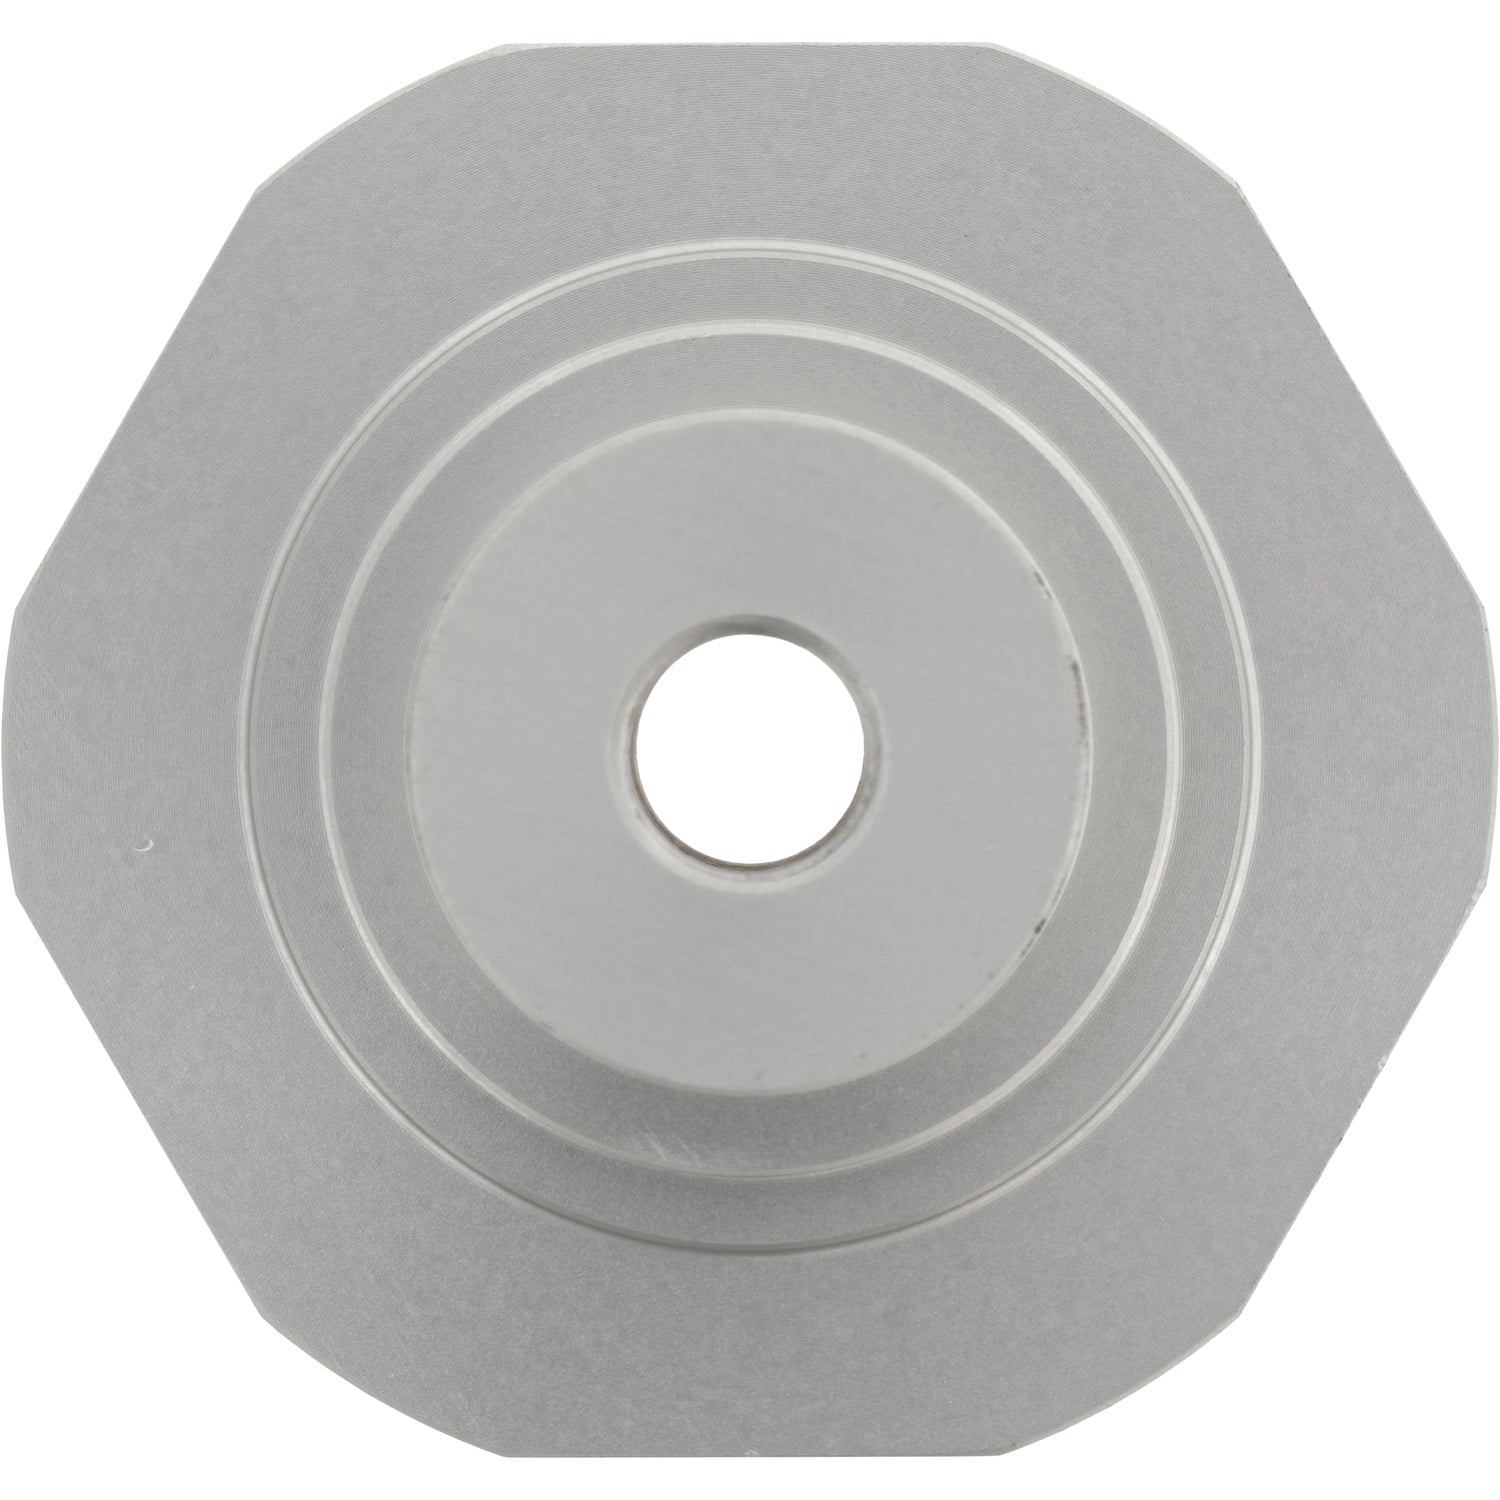 Grey hard anodized aluminum decagonal part with center through hole shown on white background.